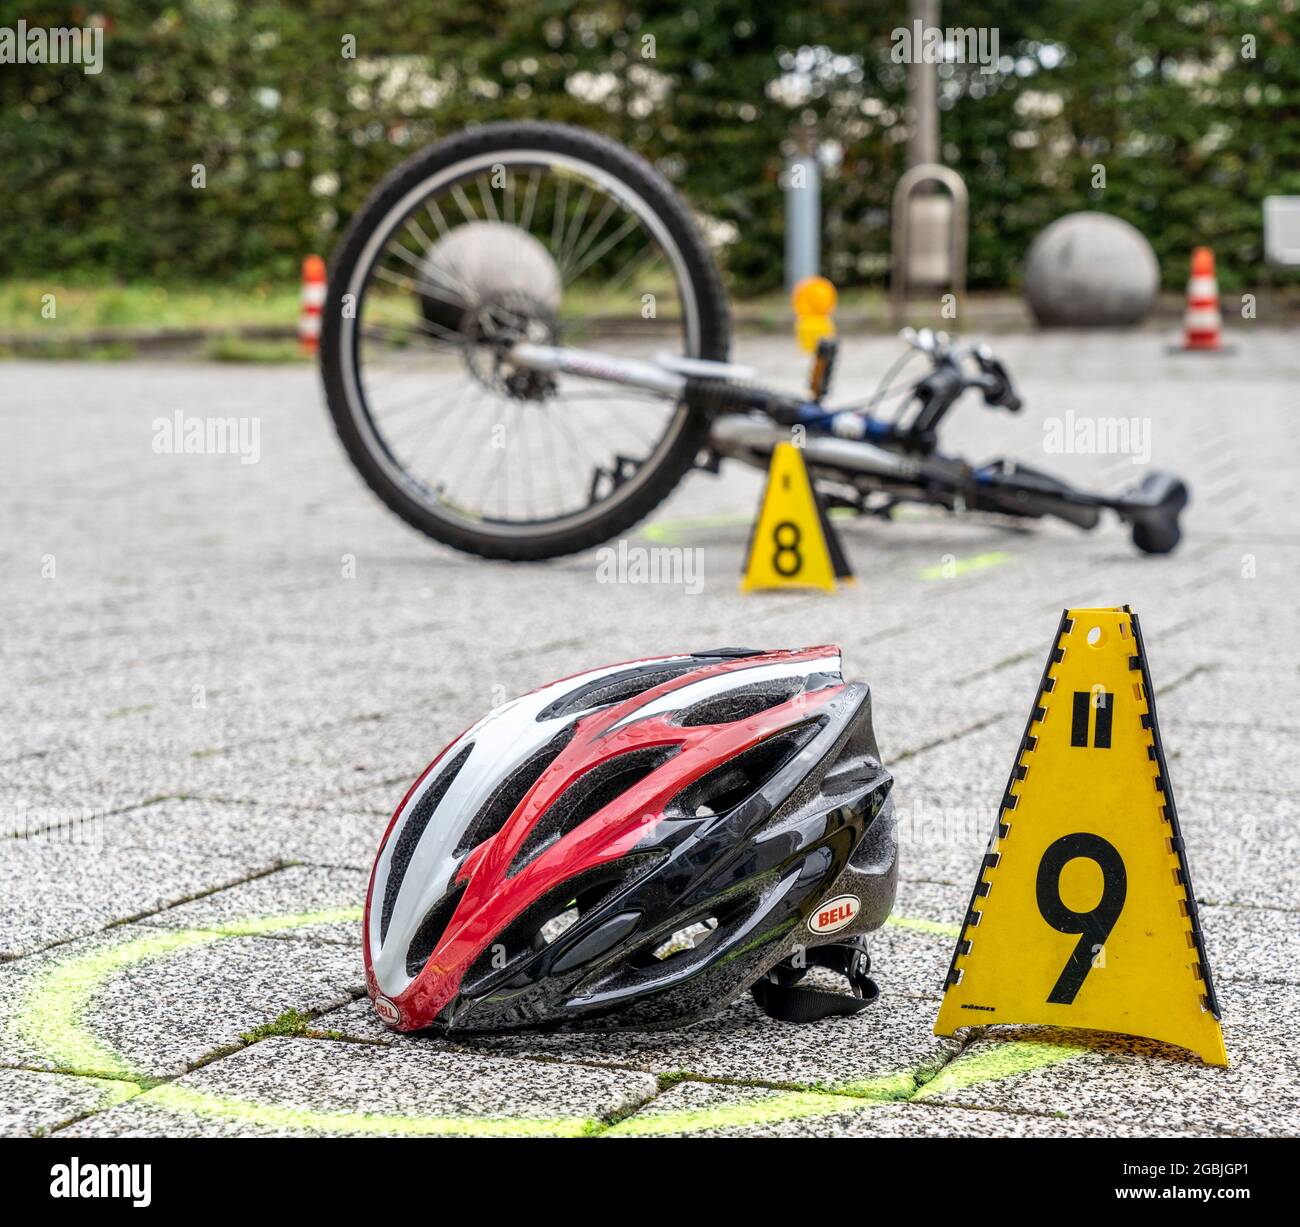 Re-enacted, fatal, accident with a passenger car and a cyclist, at the police NRW, accident investigation by specialized VU teams, traffic accident te Stock Photo